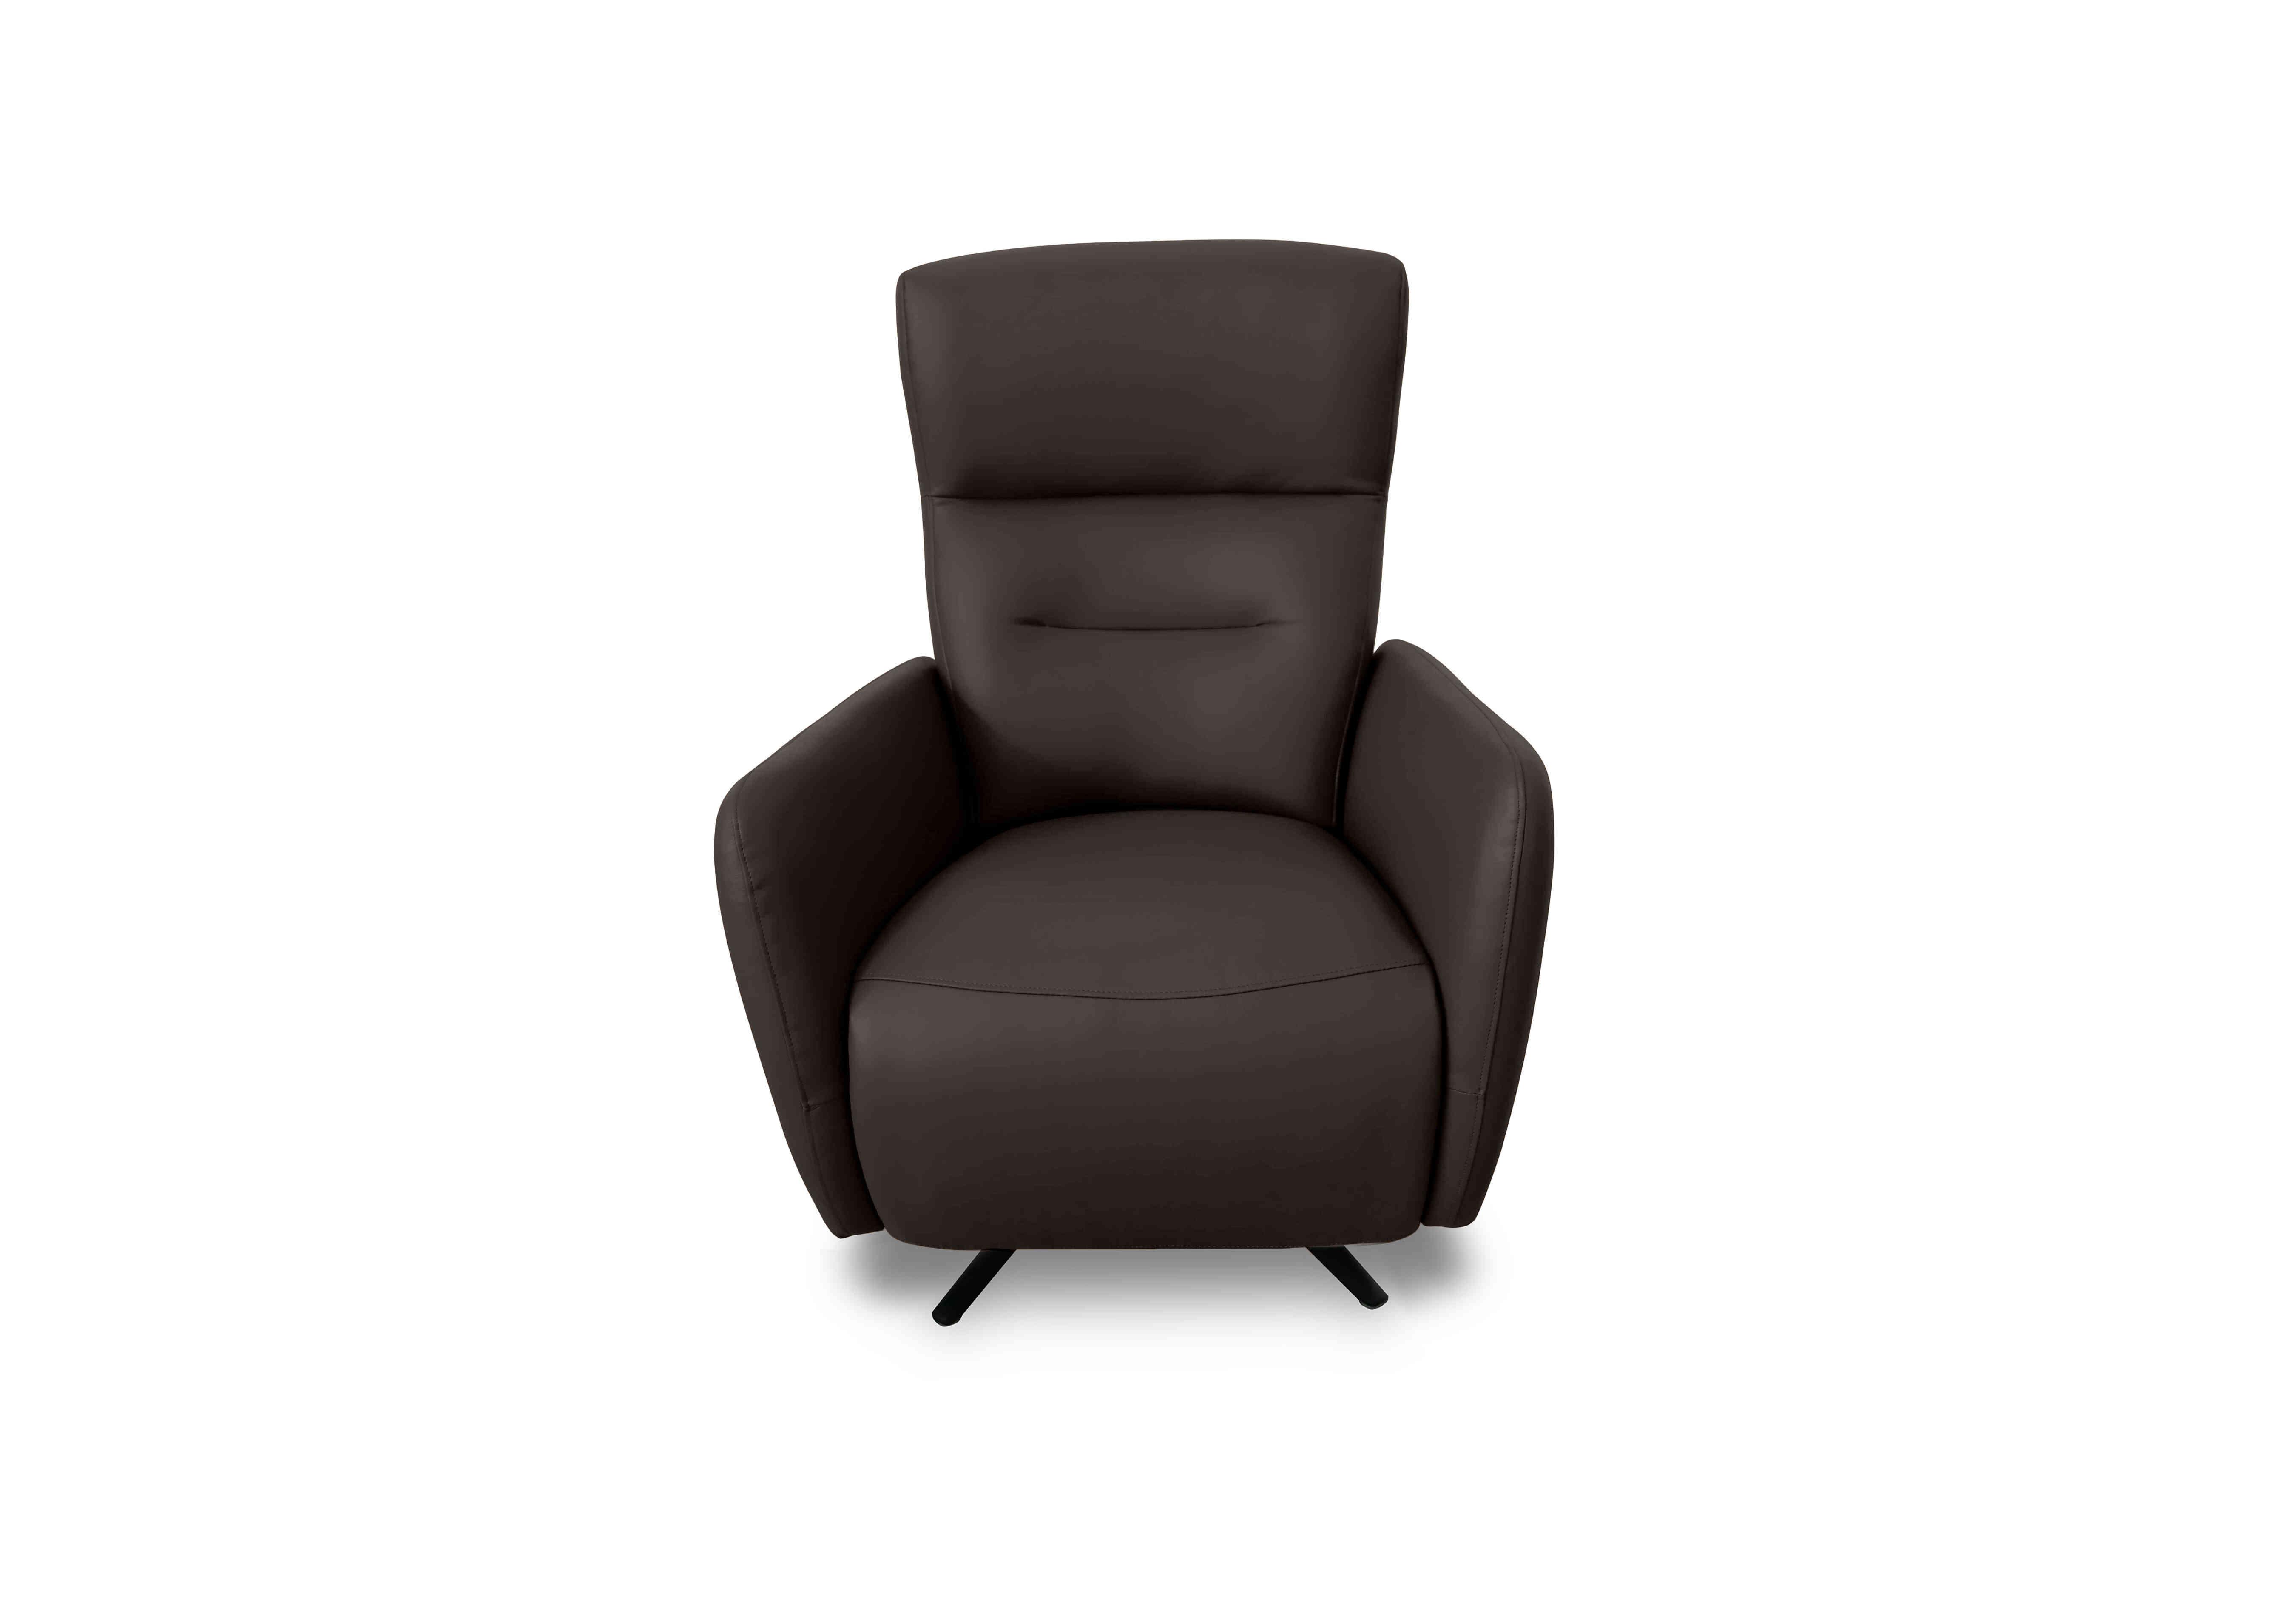 Designer Chair Collection Le Mans Leather Dual Power Recliner Swivel Chair in Bv-1748 Dark Chocolate on Furniture Village